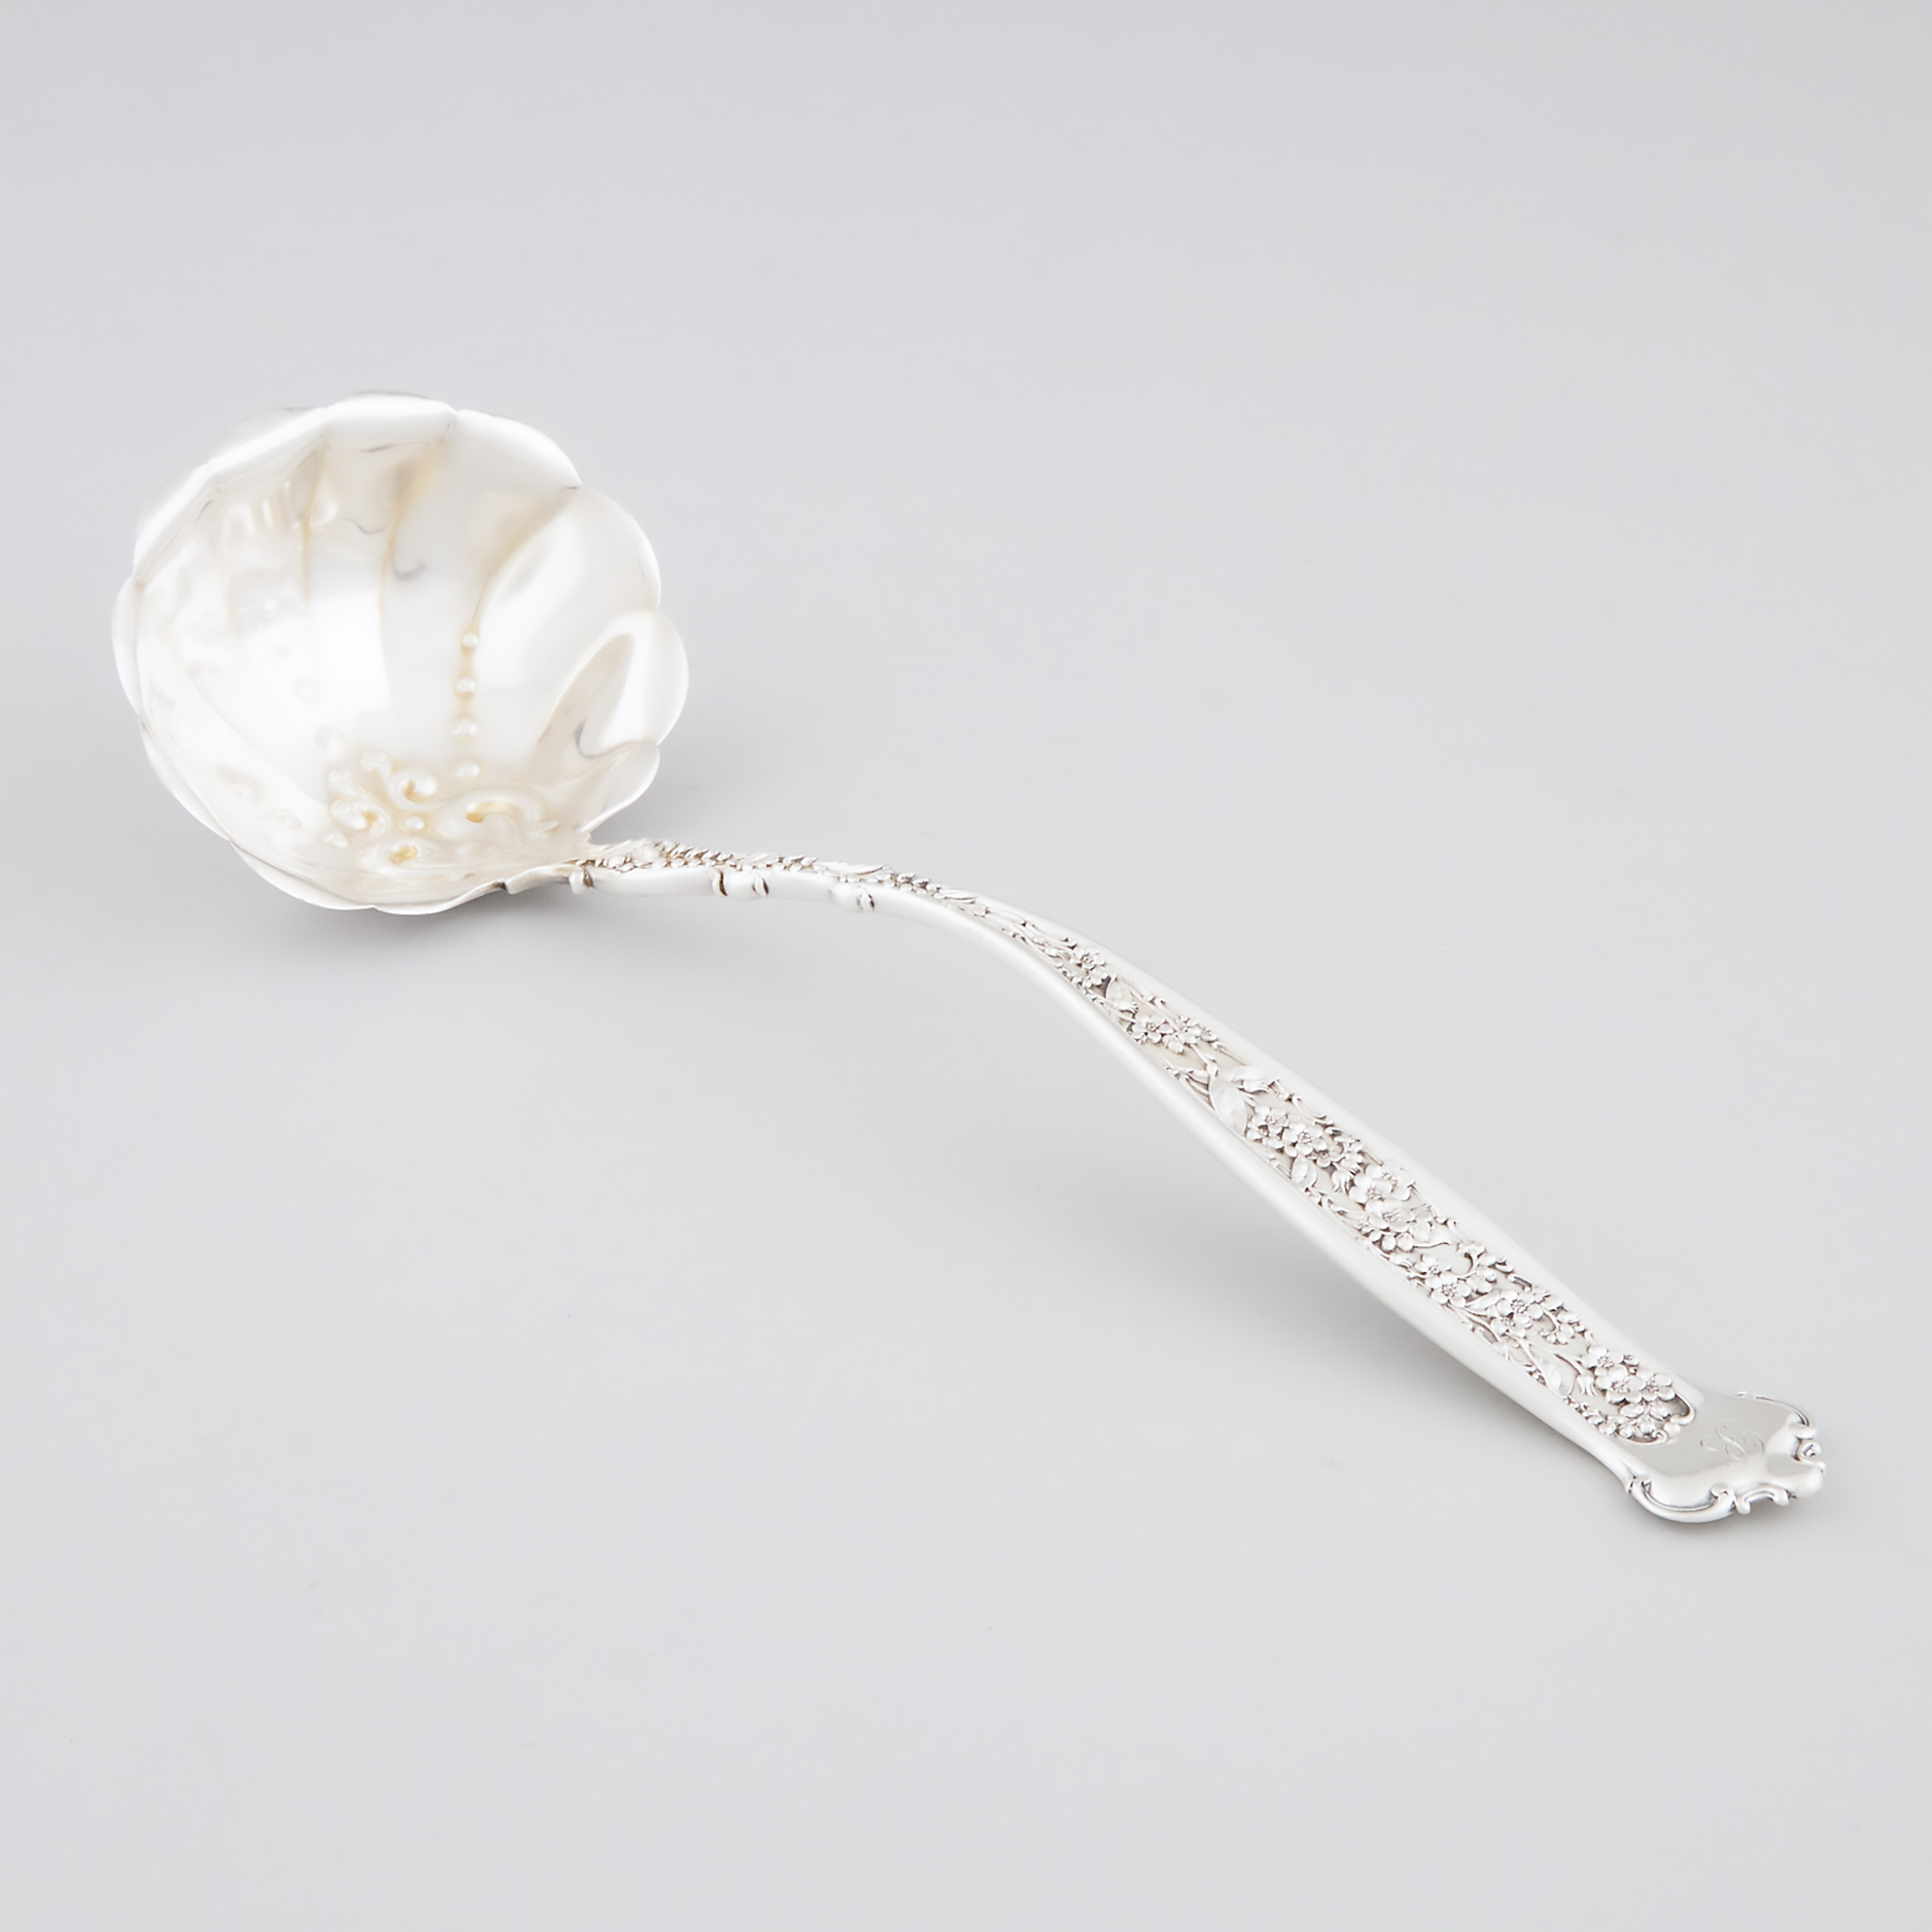 American Silver Soup Ladle, Whiting Mfg. Co., New York, N.Y., early 20th century